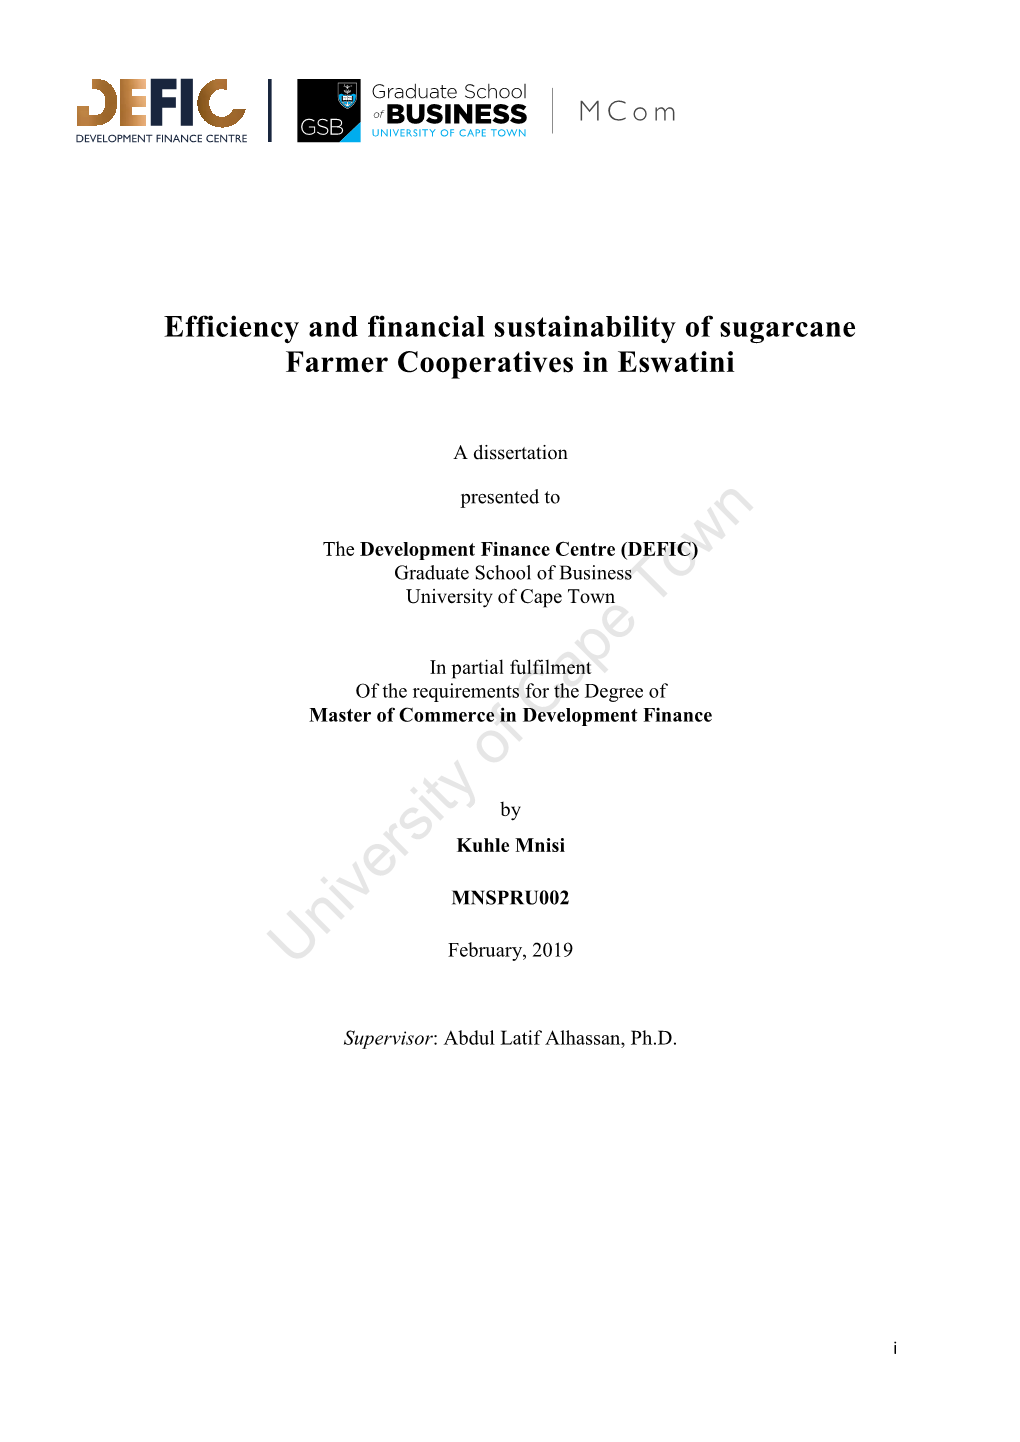 Efficiency and Financial Sustainability of Sugarcane Farmer Cooperatives in Eswatini